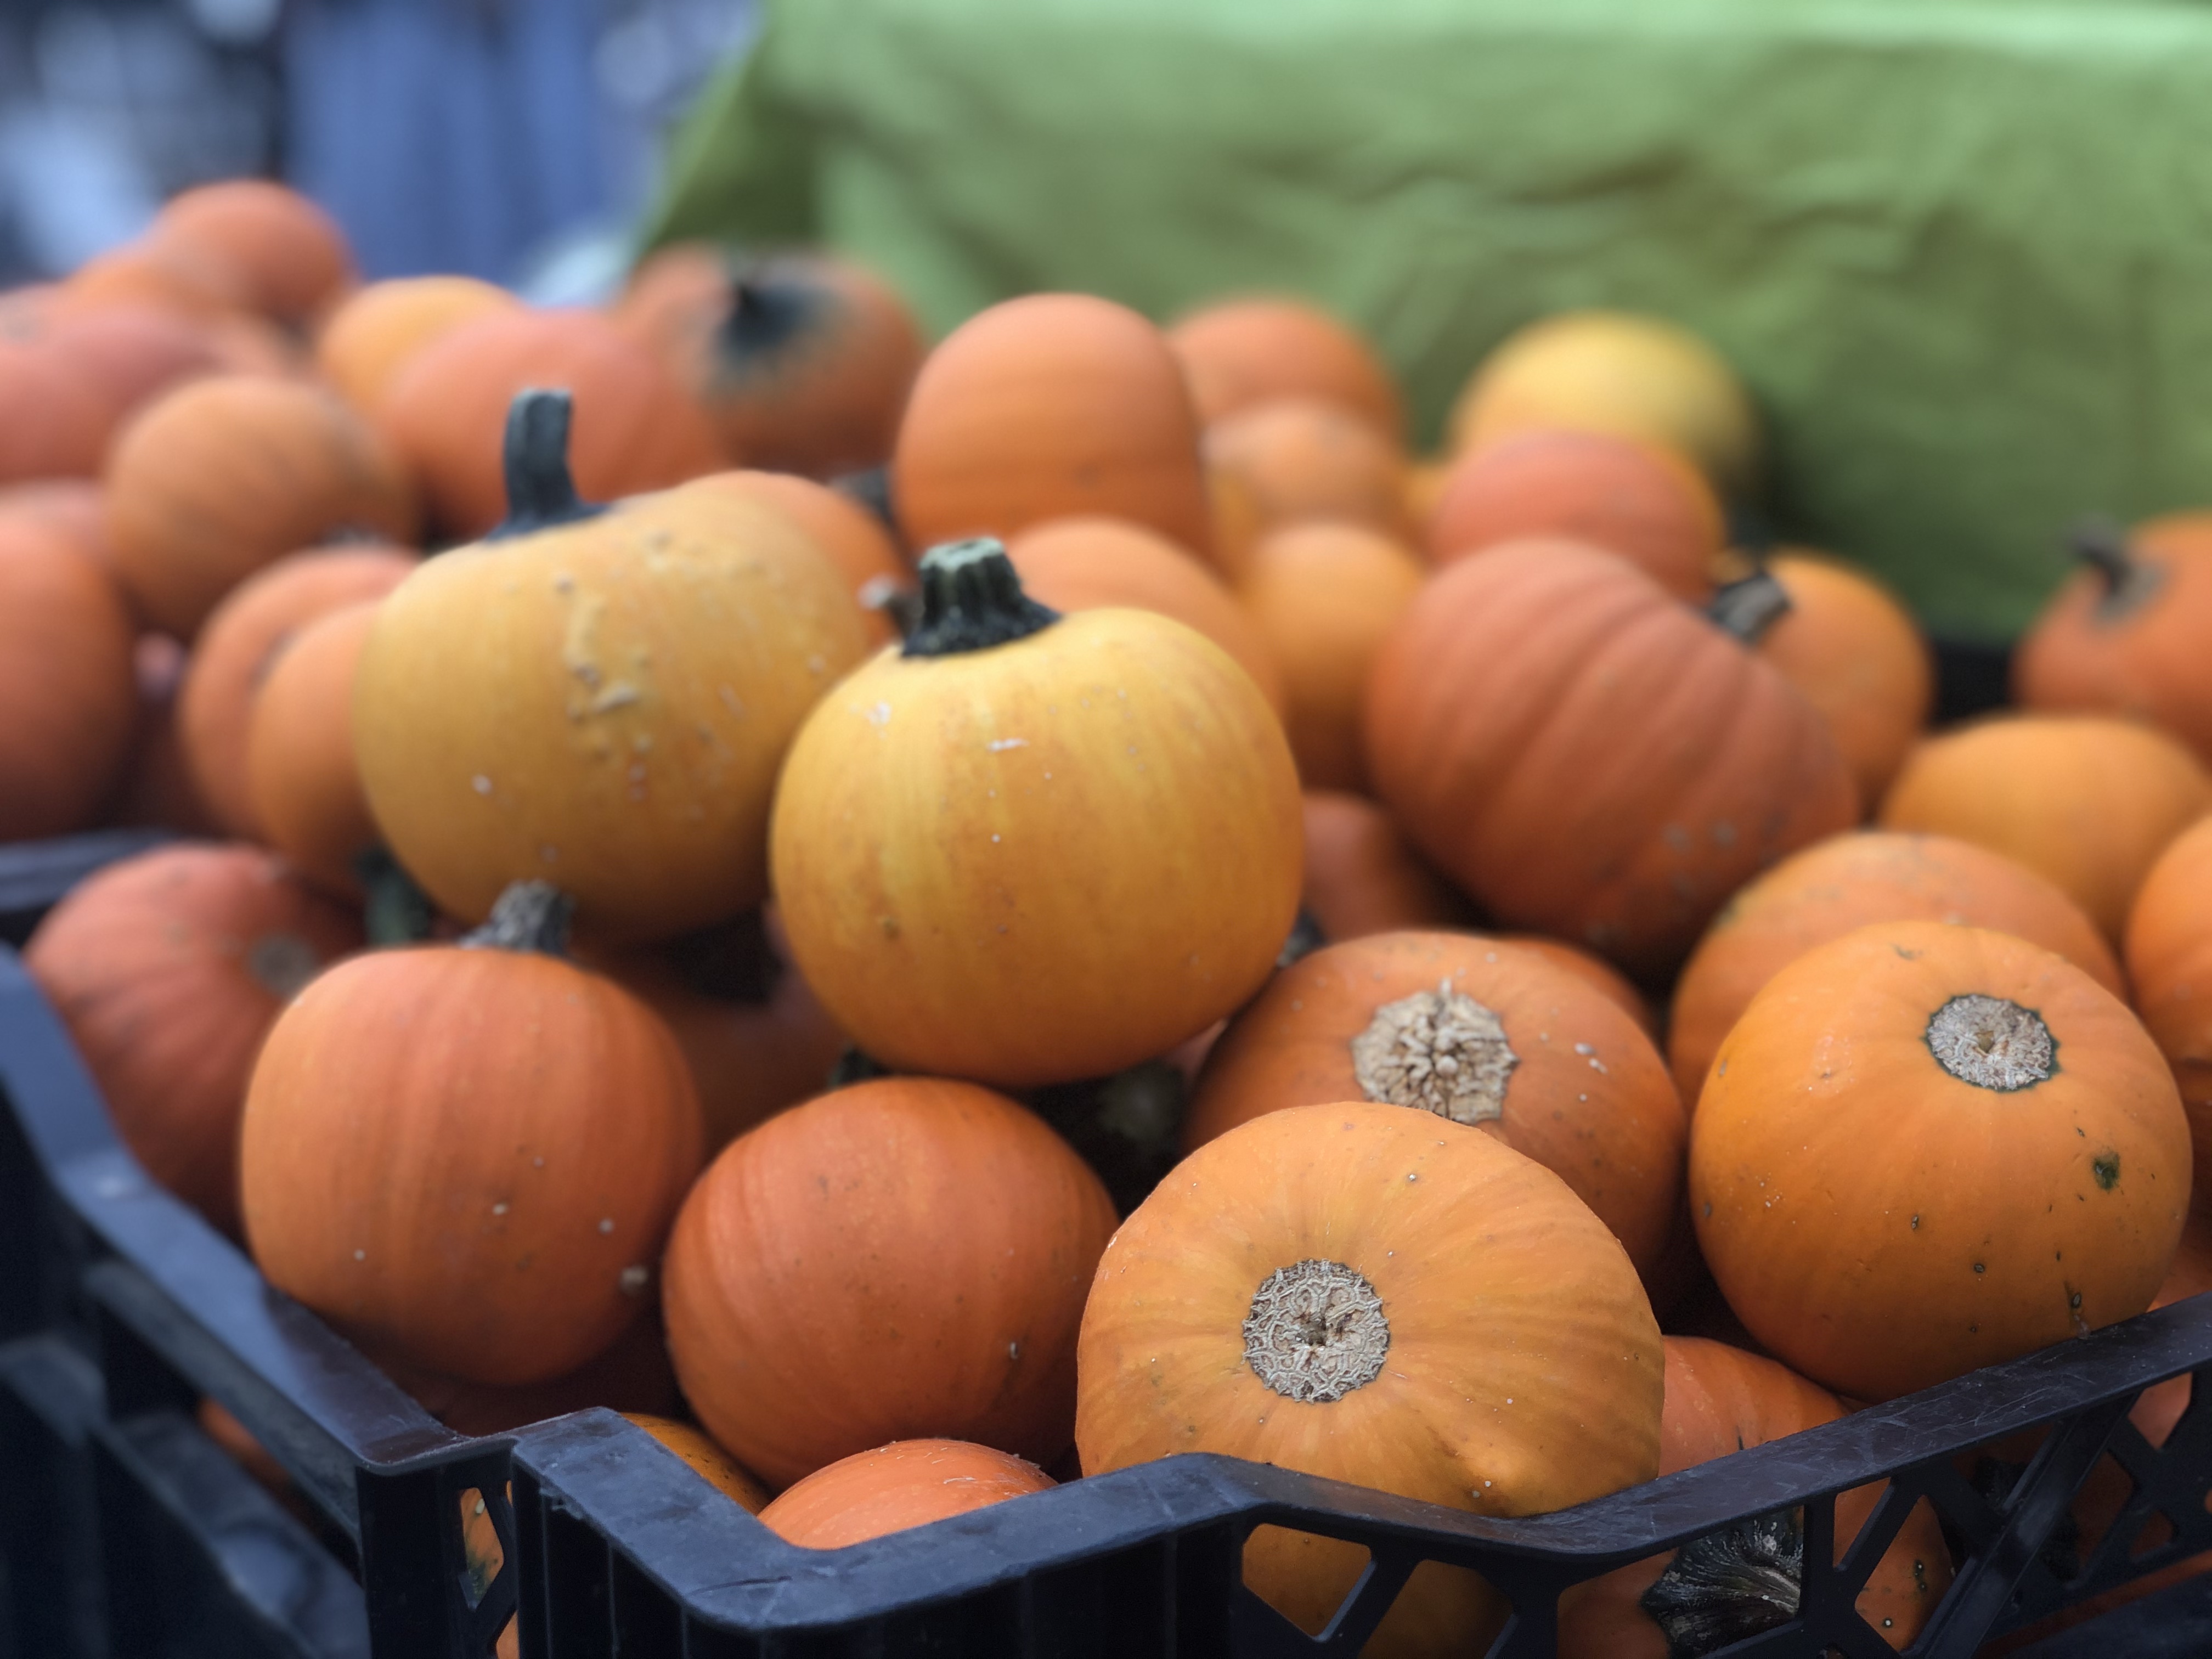 Small pumpkins are stacked on top of each other at the Urbana Market in the Square. Photo by Alyssa Buckley.